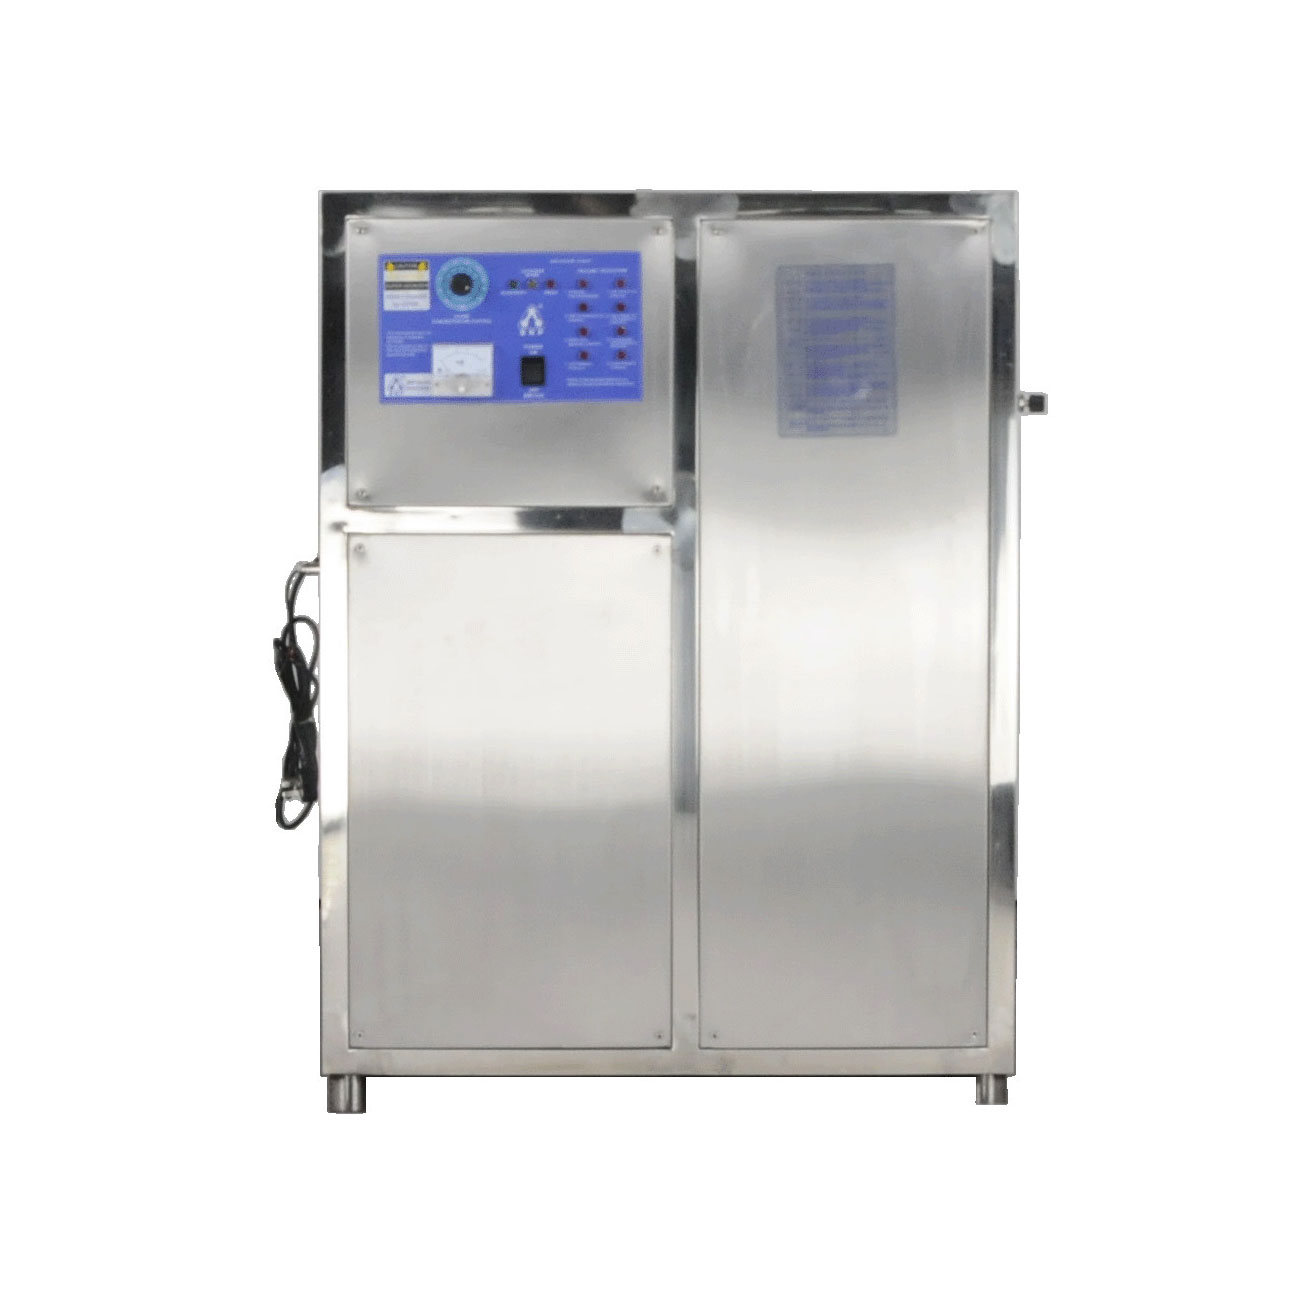 Factory Free sample Swimming Pool Equipment - Reliable Supplier China BNP SOZ-YW-200G Industrial Oxygen-Enriched Ozone Generator for Public Place Air Purifier and O3 Sterilizer Water Disinfection ...